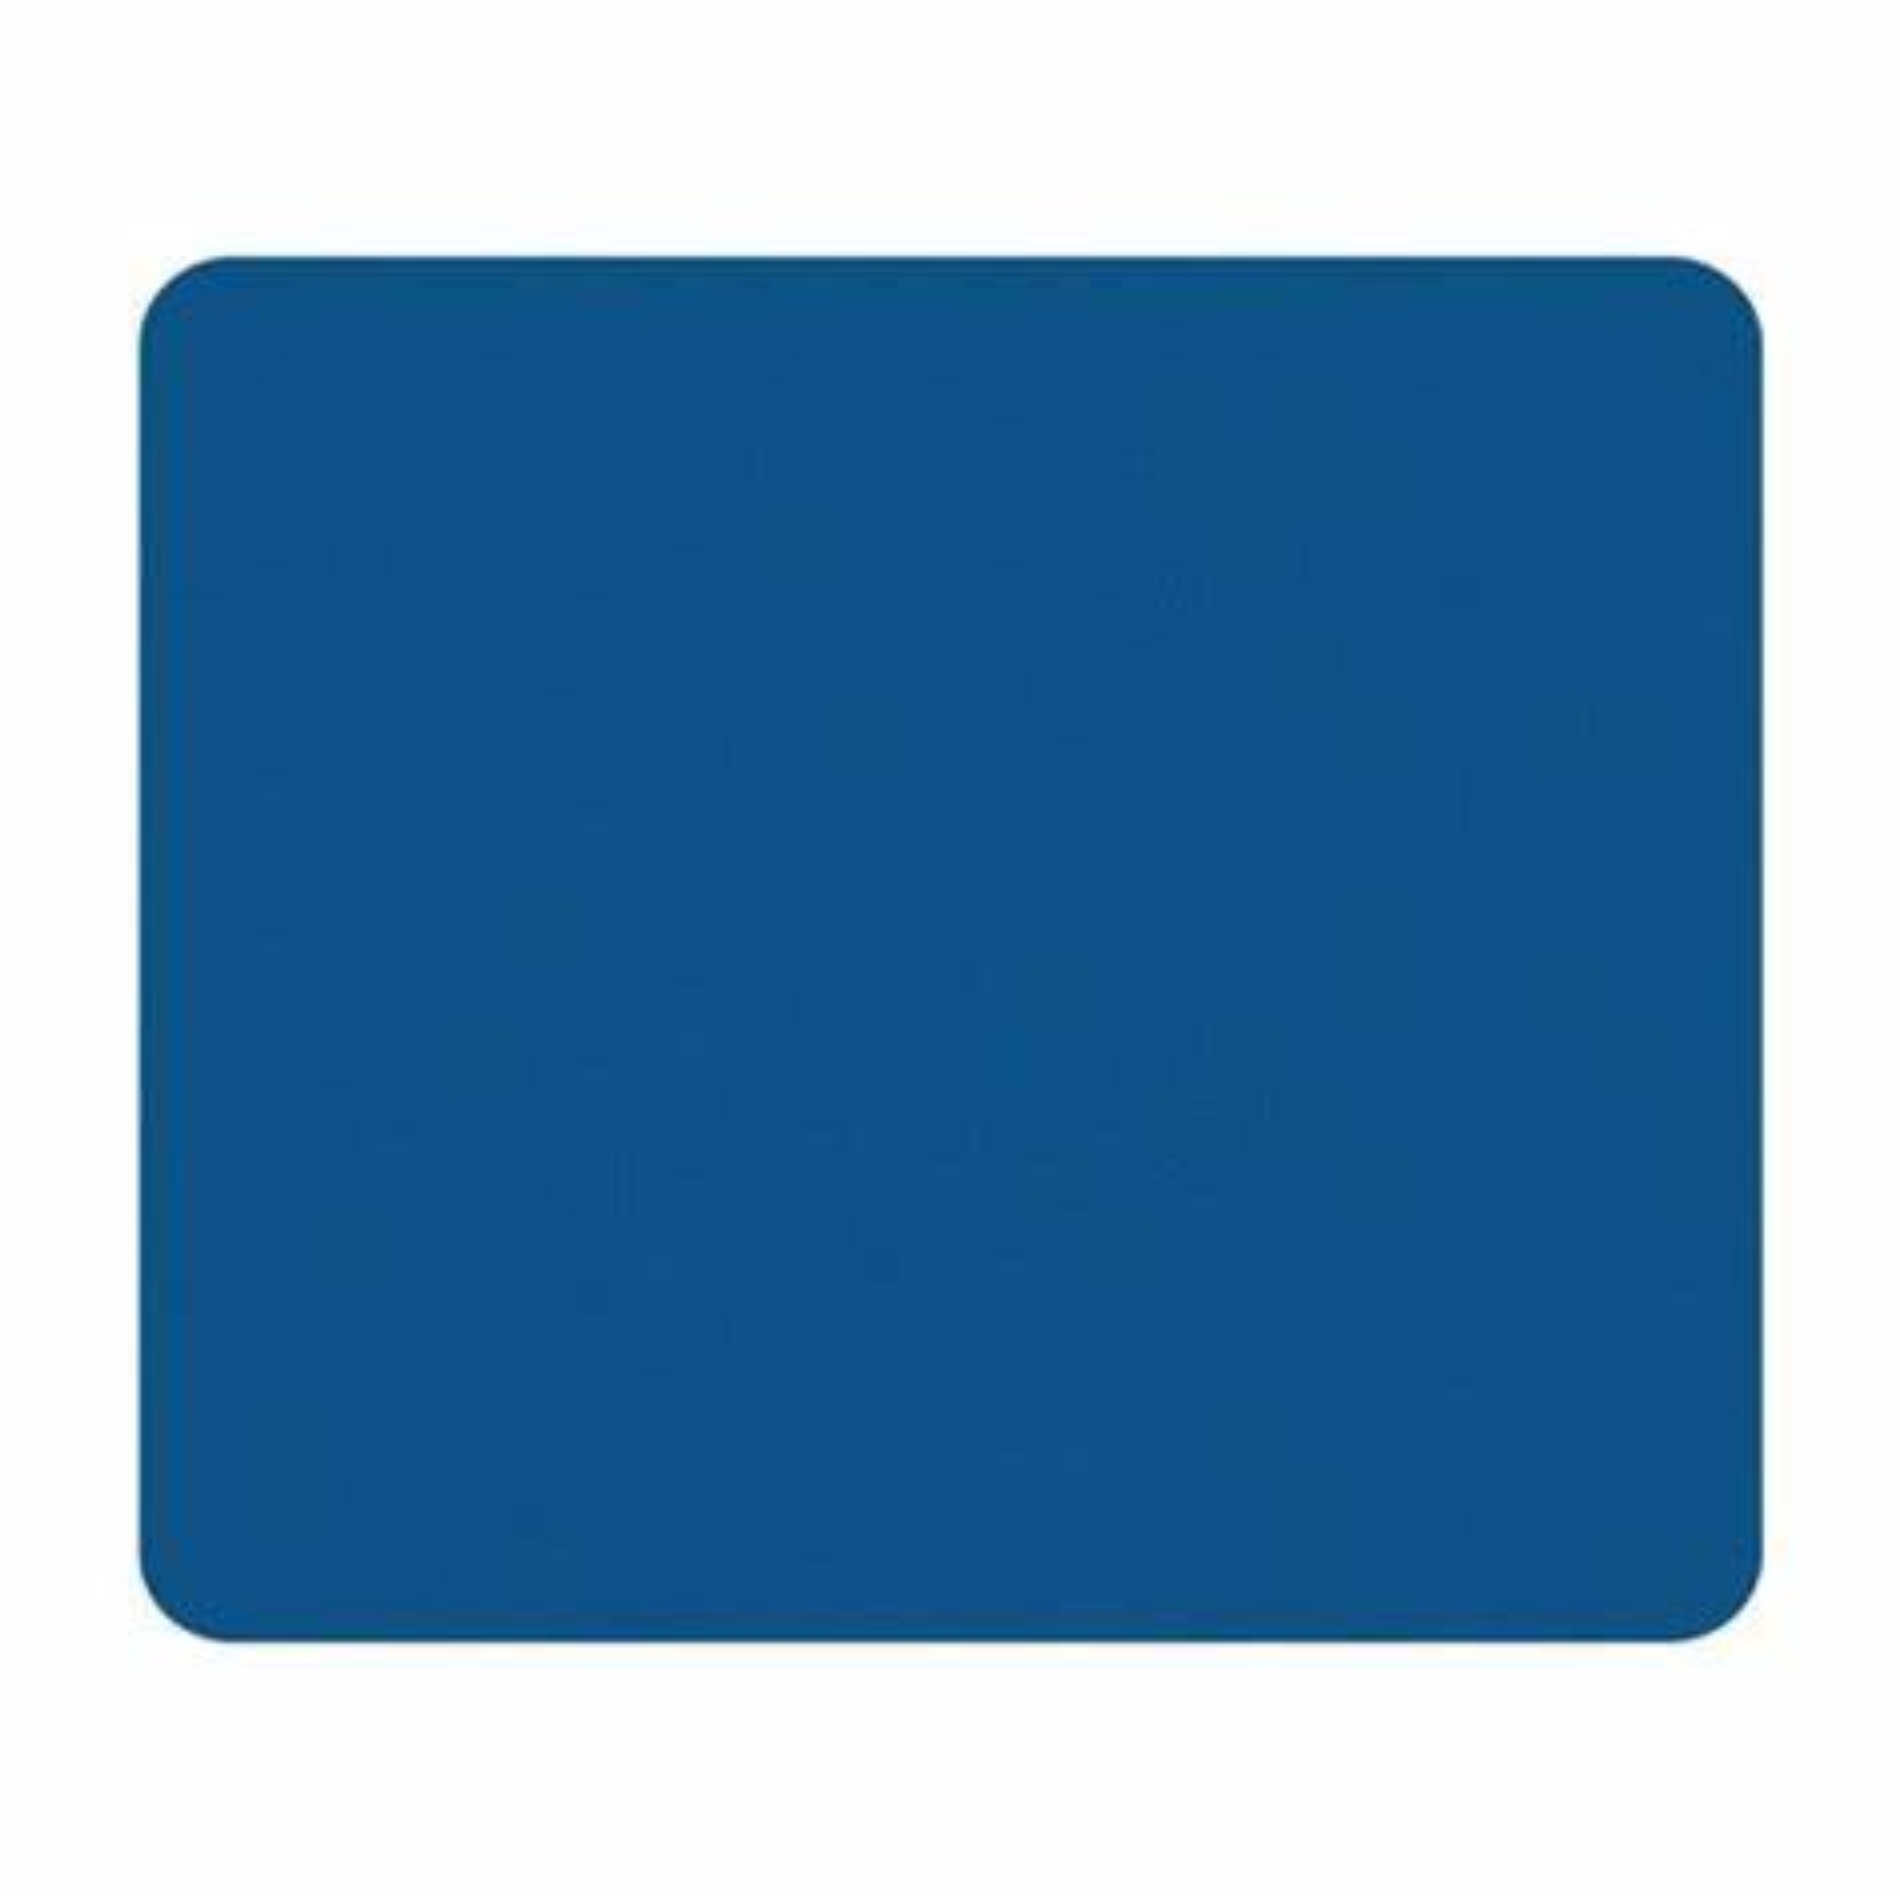 Picture of Fellowes Non-Slip Rubber Mousepad - Blue